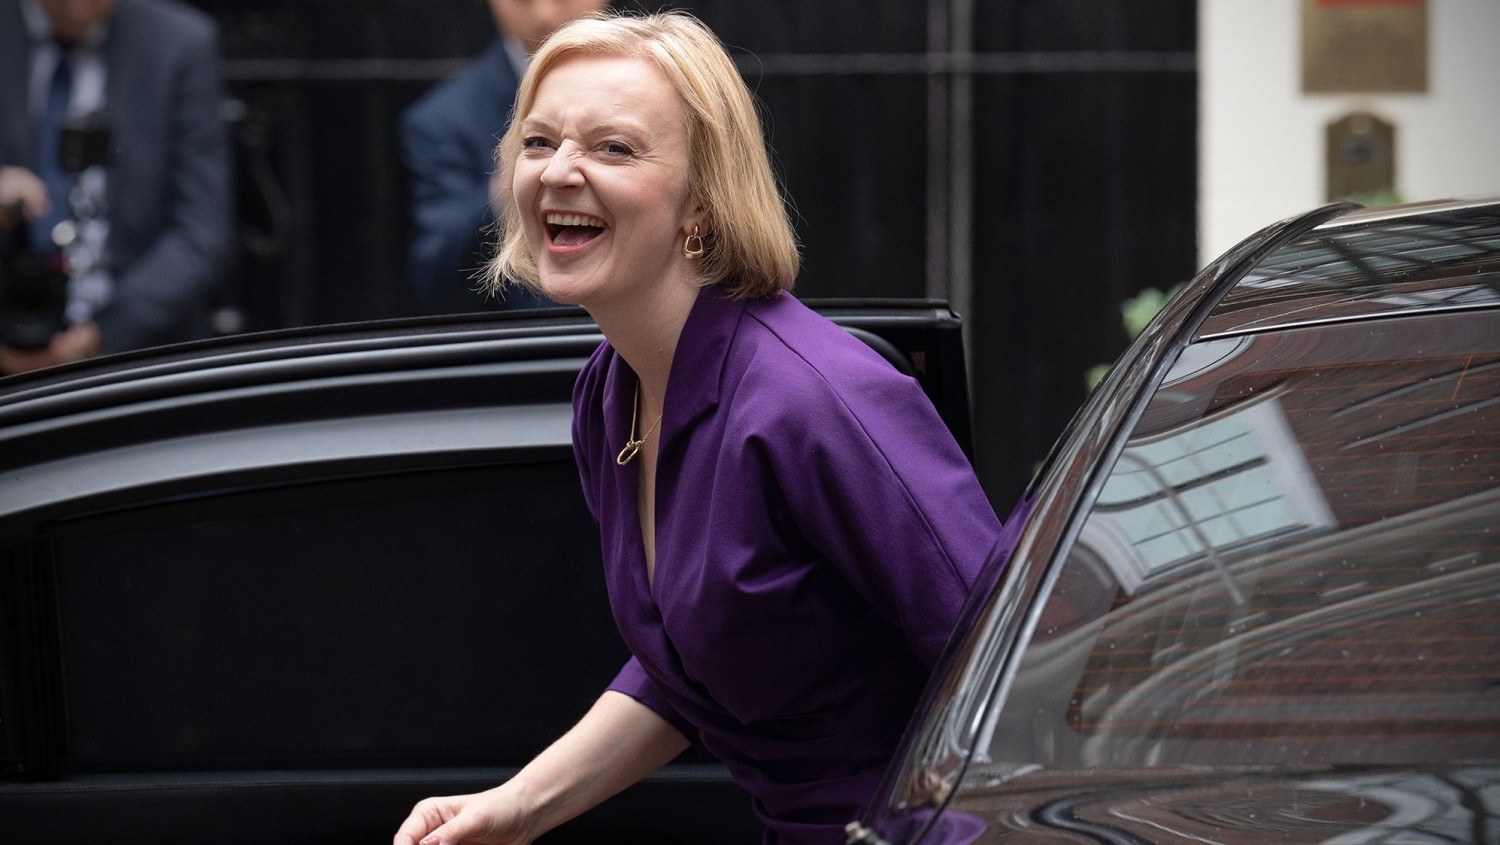 Truss is eligible for an annual allowance to cover the cost of public duties after leaving office | Carl Court/Getty Images